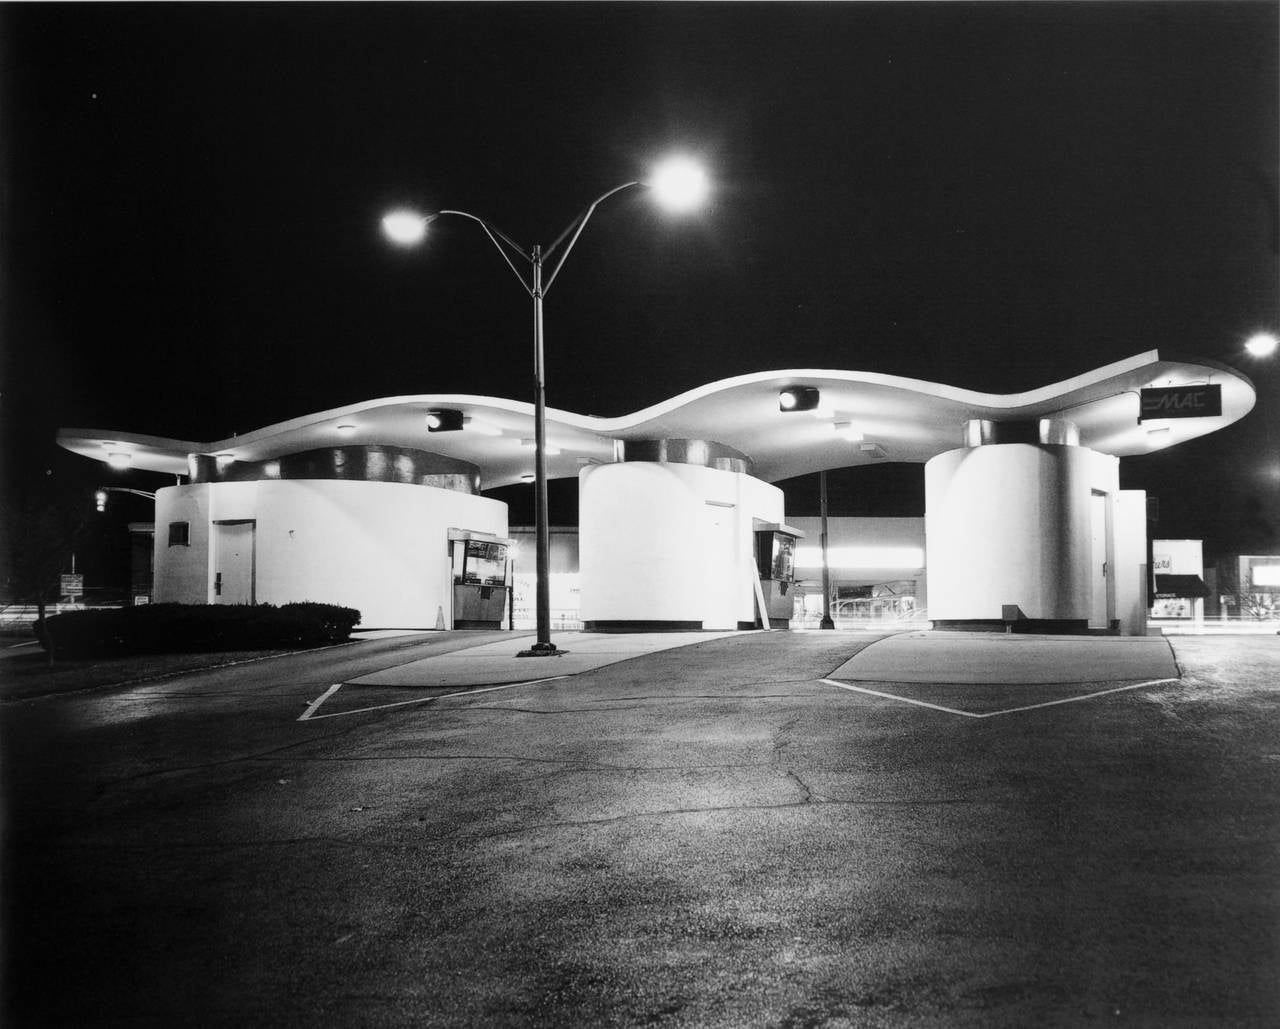 George Tice Black and White Photograph – First Union Drive In Bank, Caldwell, NJ